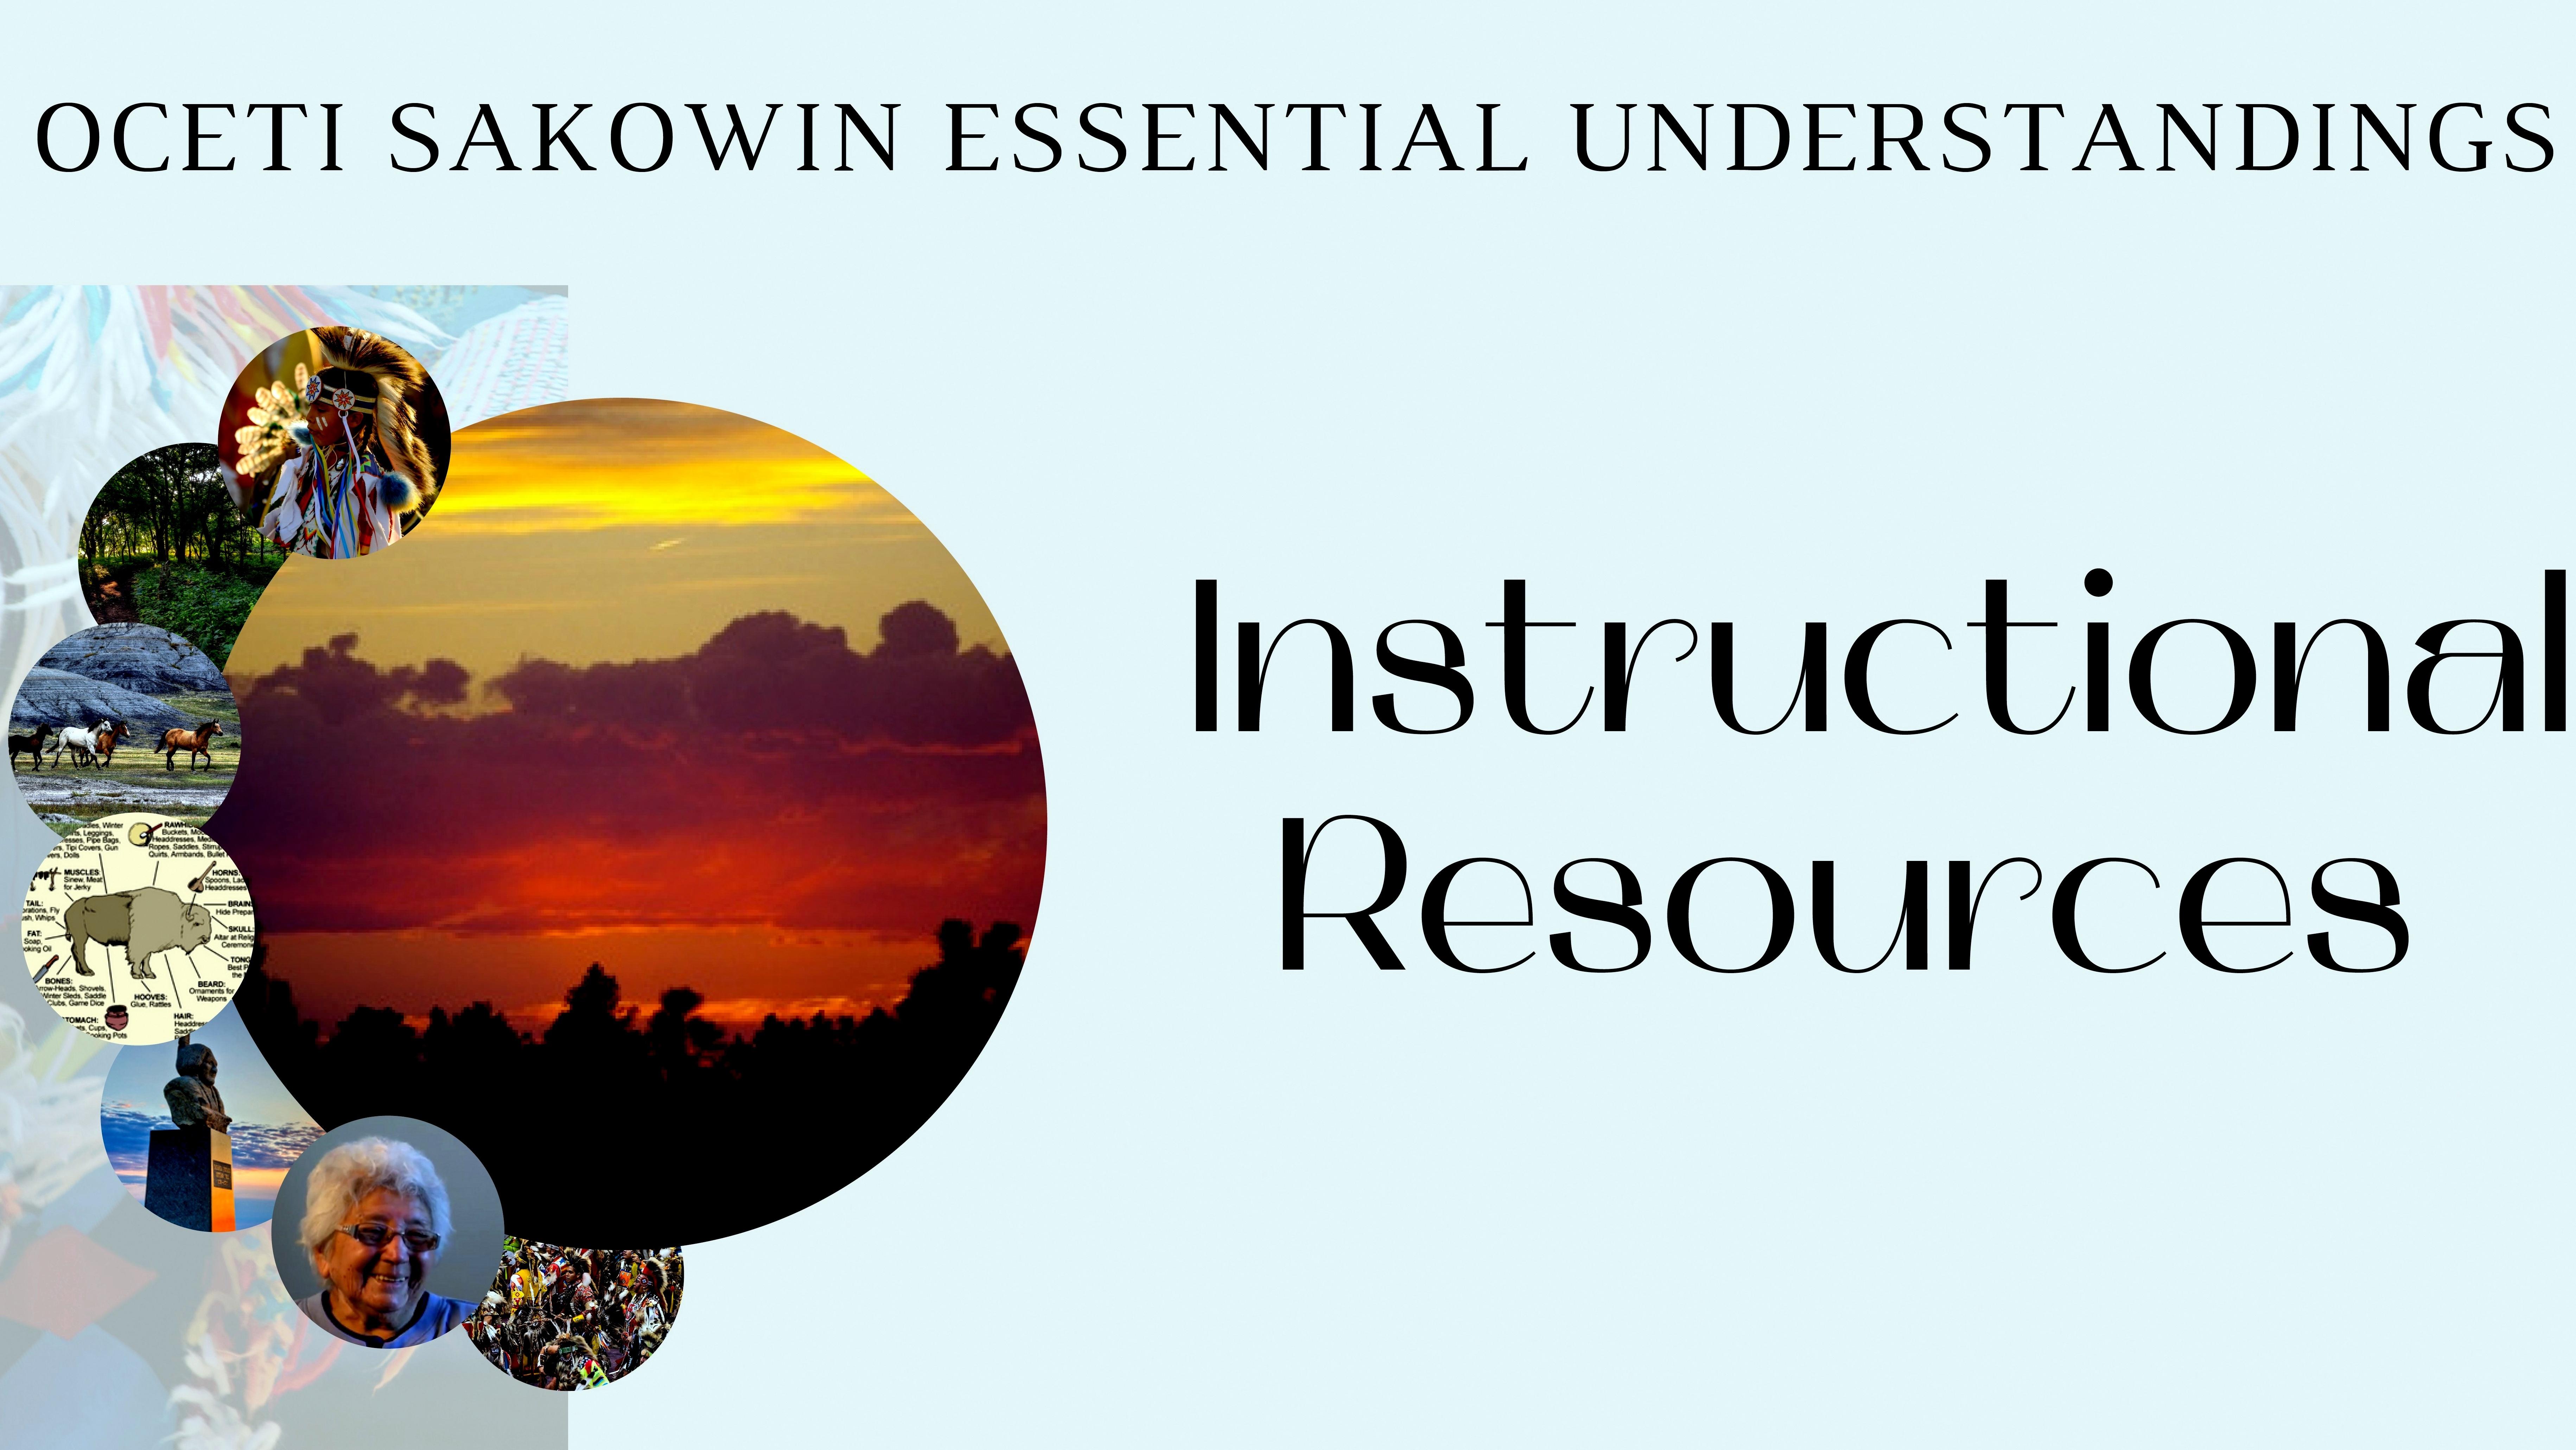 Decorative logo of instructional resources for the Oceti Sakowin Essential Understandings.  